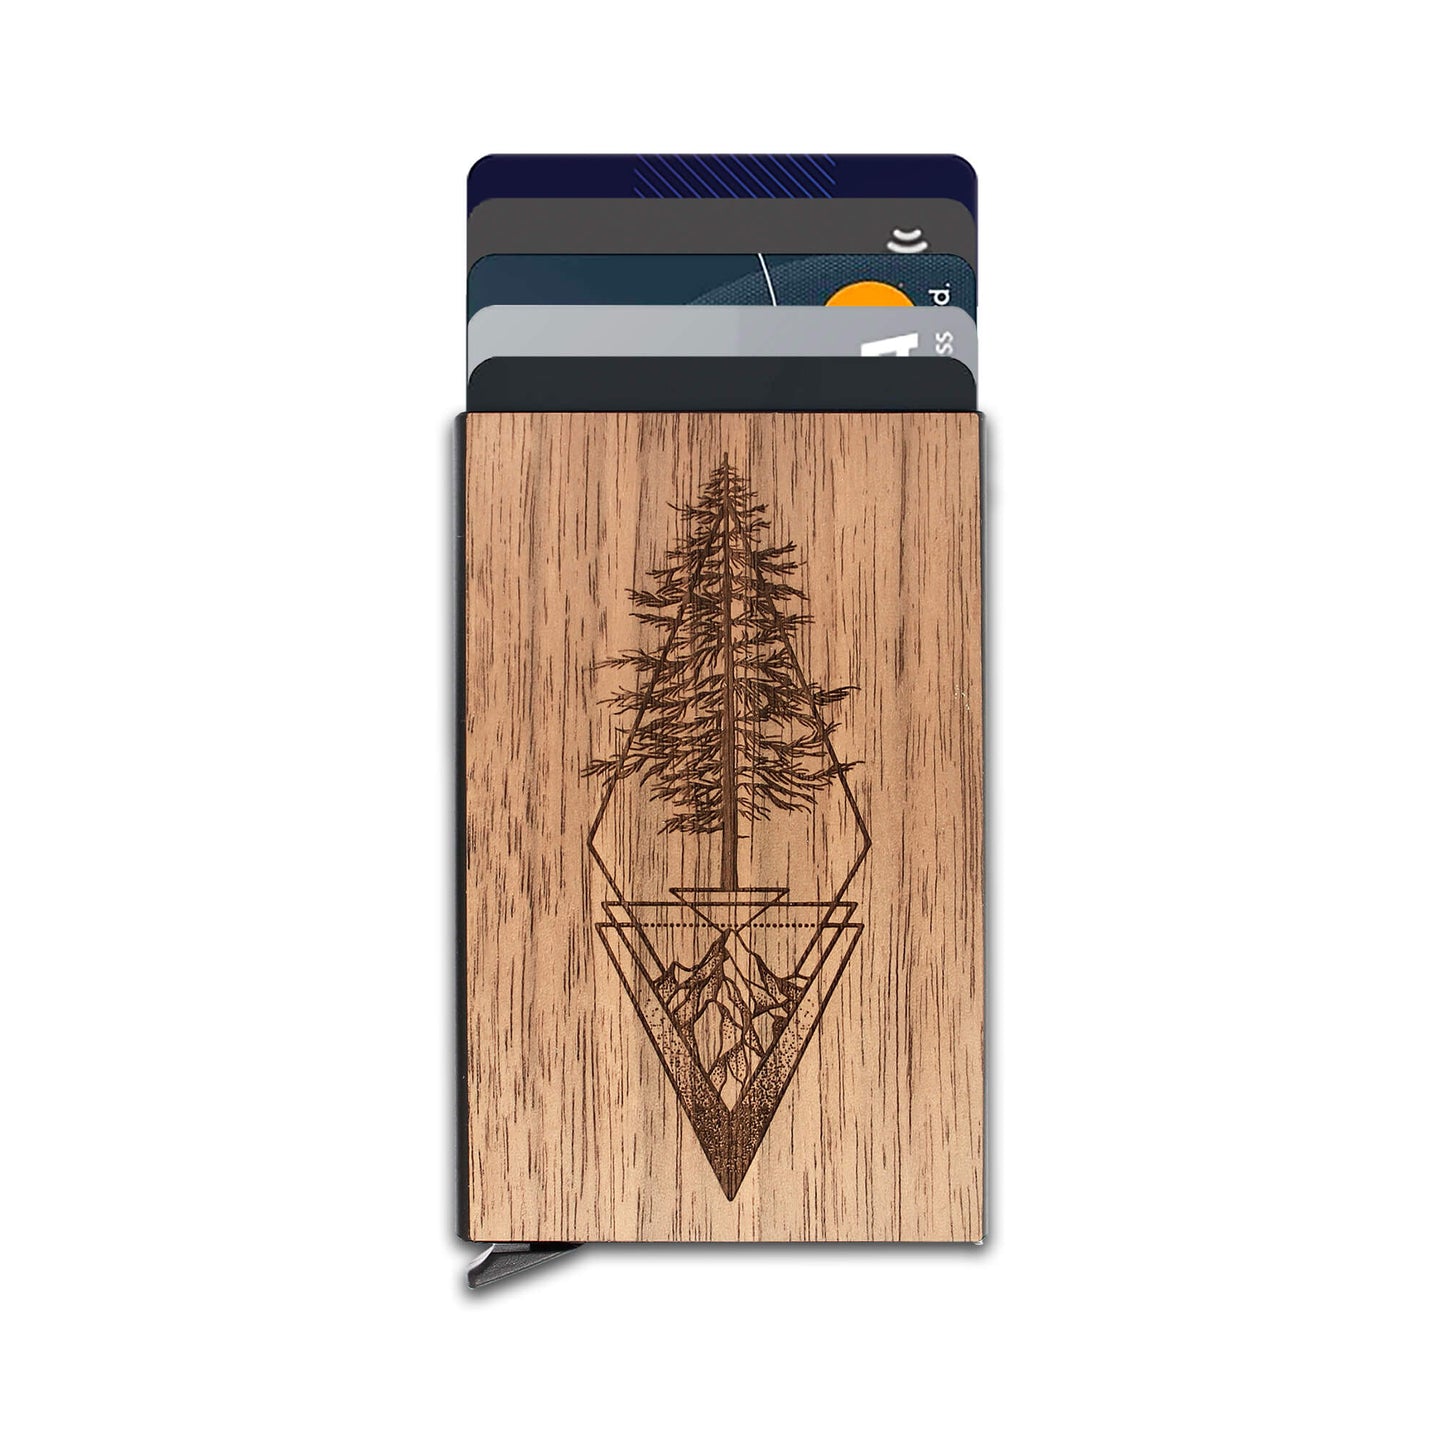 Picea - Metal Credit Card Holder with Wooden front